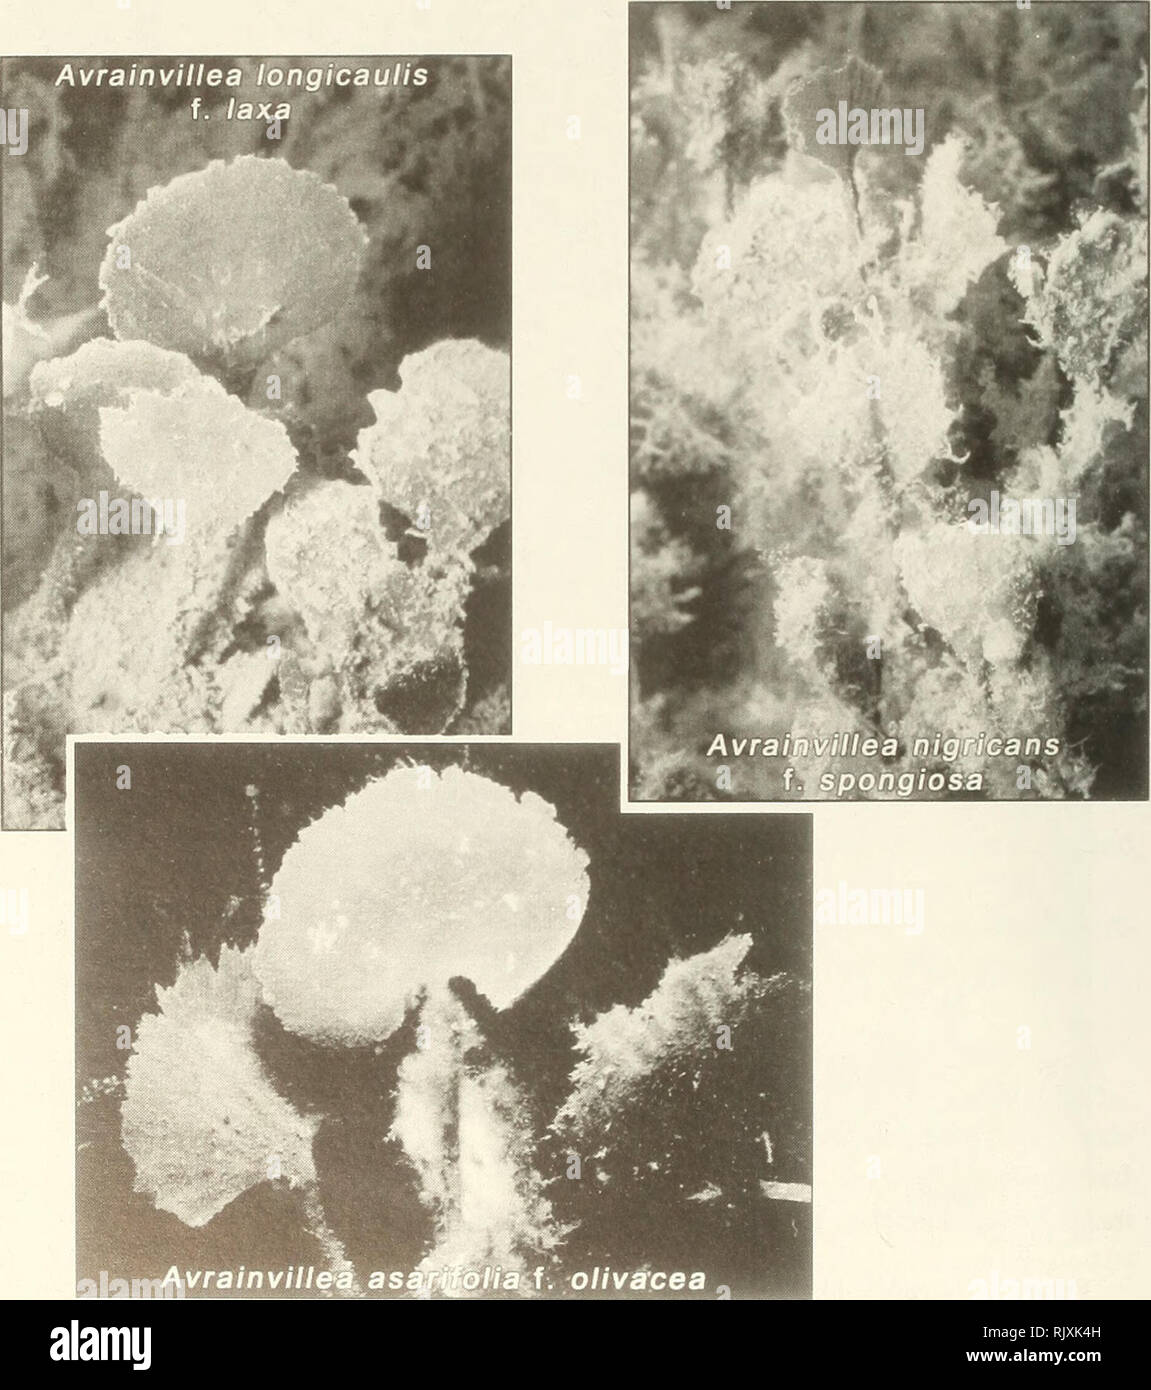 . Atoll research bulletin. Coral reefs and islands; Marine biology; Marine sciences. exceptions of herbarium-based treatments ofHalimeda (Hillis-Colinvaux, 1980) and Pacific Avrainvillea (Olsen-Stojkovich, 1985). The systematic monograph on tropical western Atlantic Avrainvillea (Littler and Littler, 1992), as well as the floristic field guide for the nearby Pelican Cays (Littler and Littler, 1997), alleviated the major taxonomic stumbling blocks and enabled this study. Experimental Organisms As mentioned, the siphonaceous green algal genus Avrainvillea often dominates the standing stocks and  Stock Photo